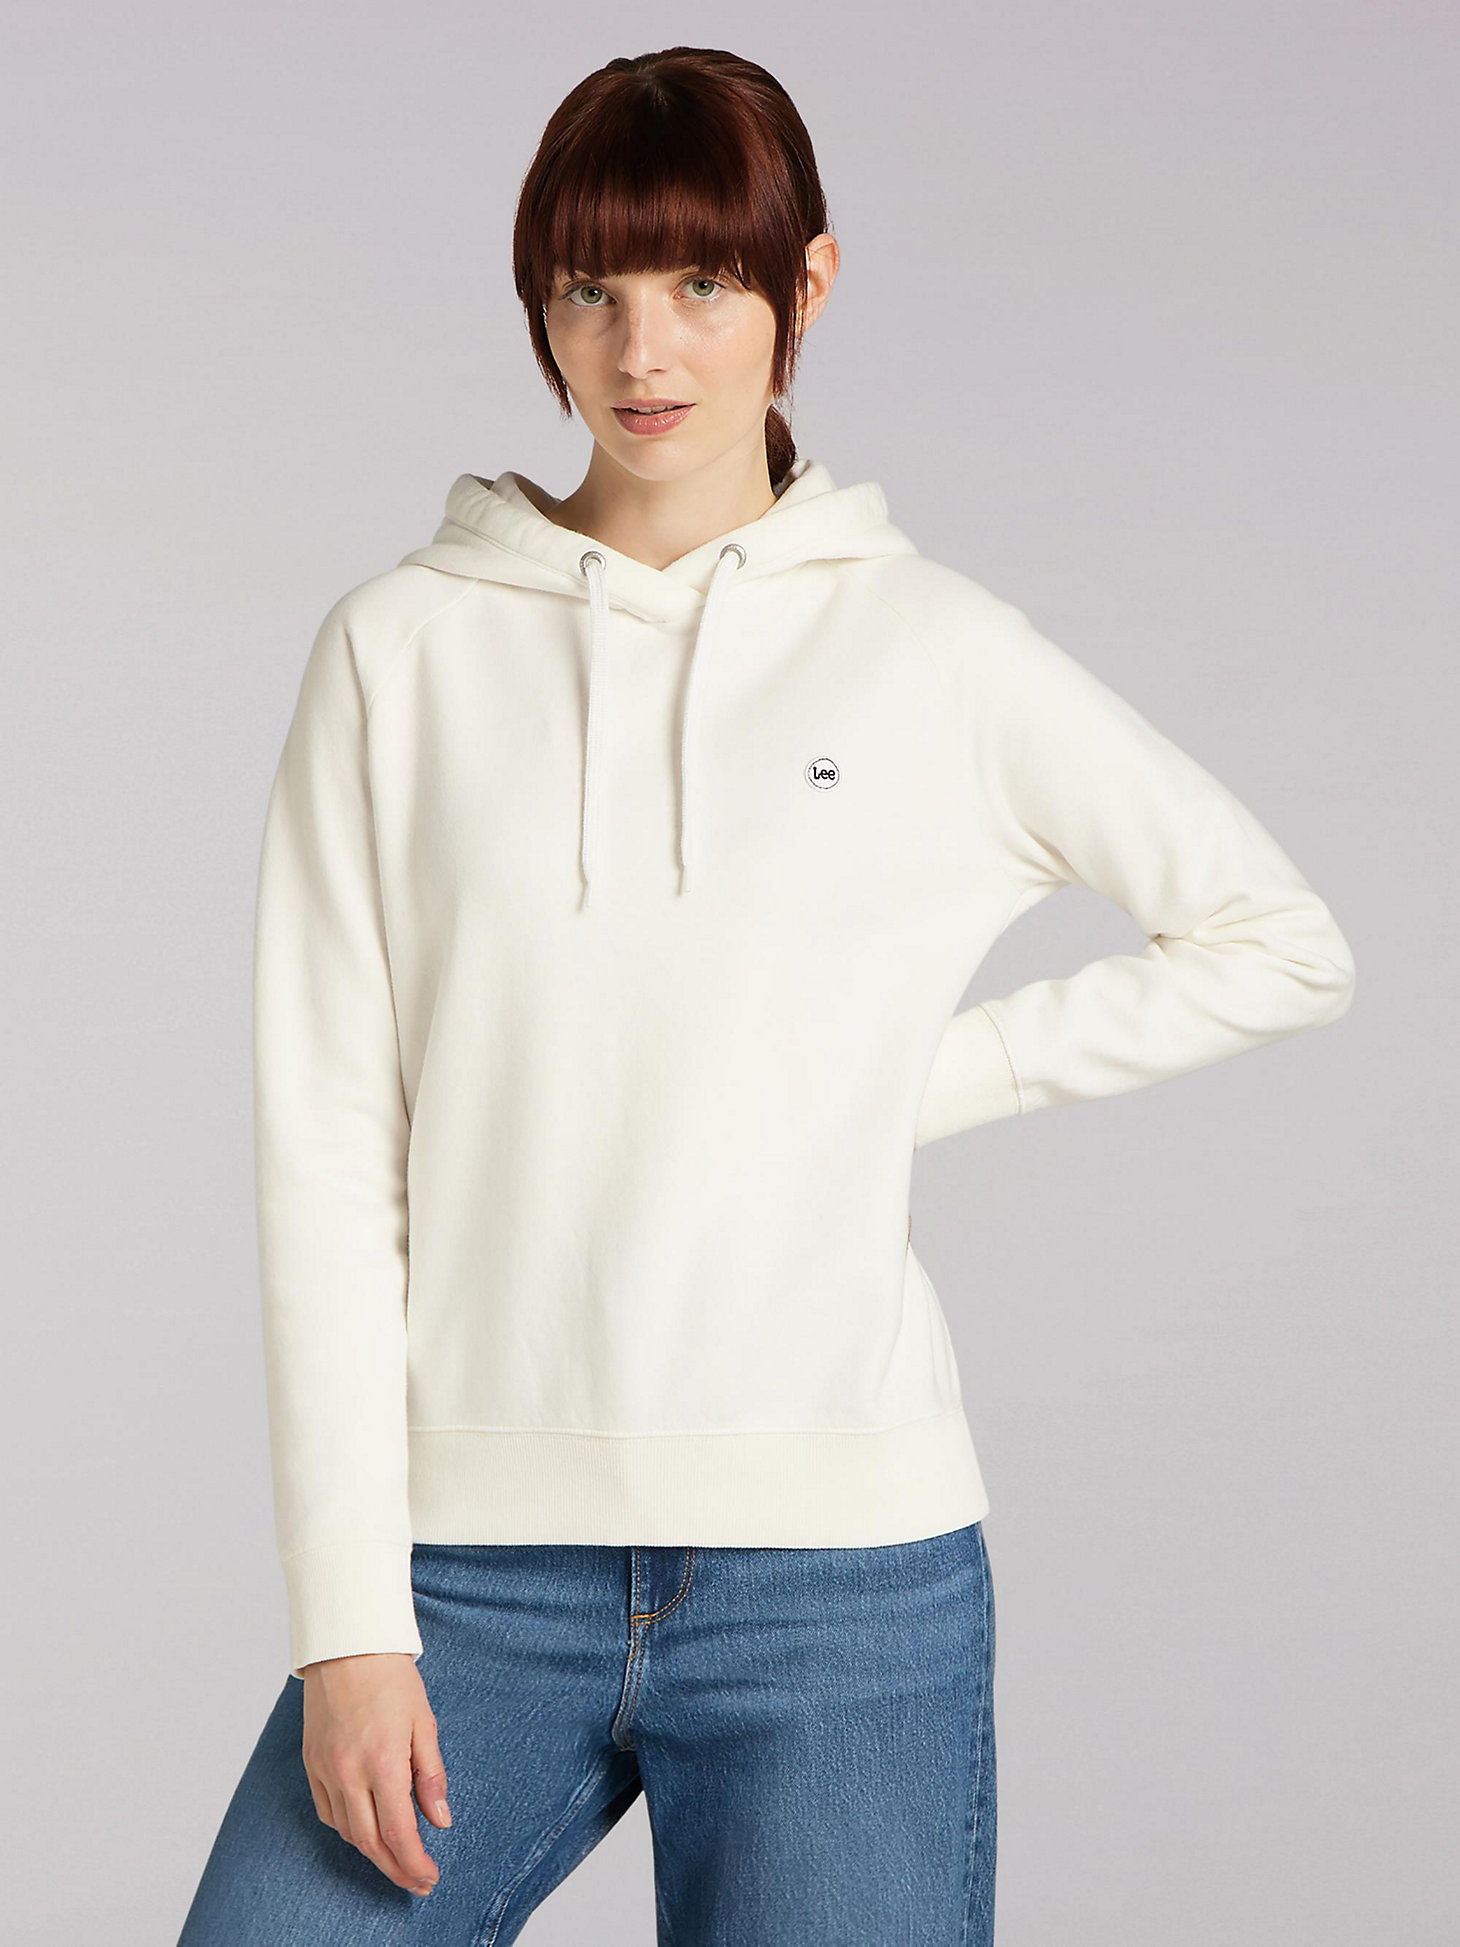 Women's Lee European Collection Essential Hoodie in White Canvas main view